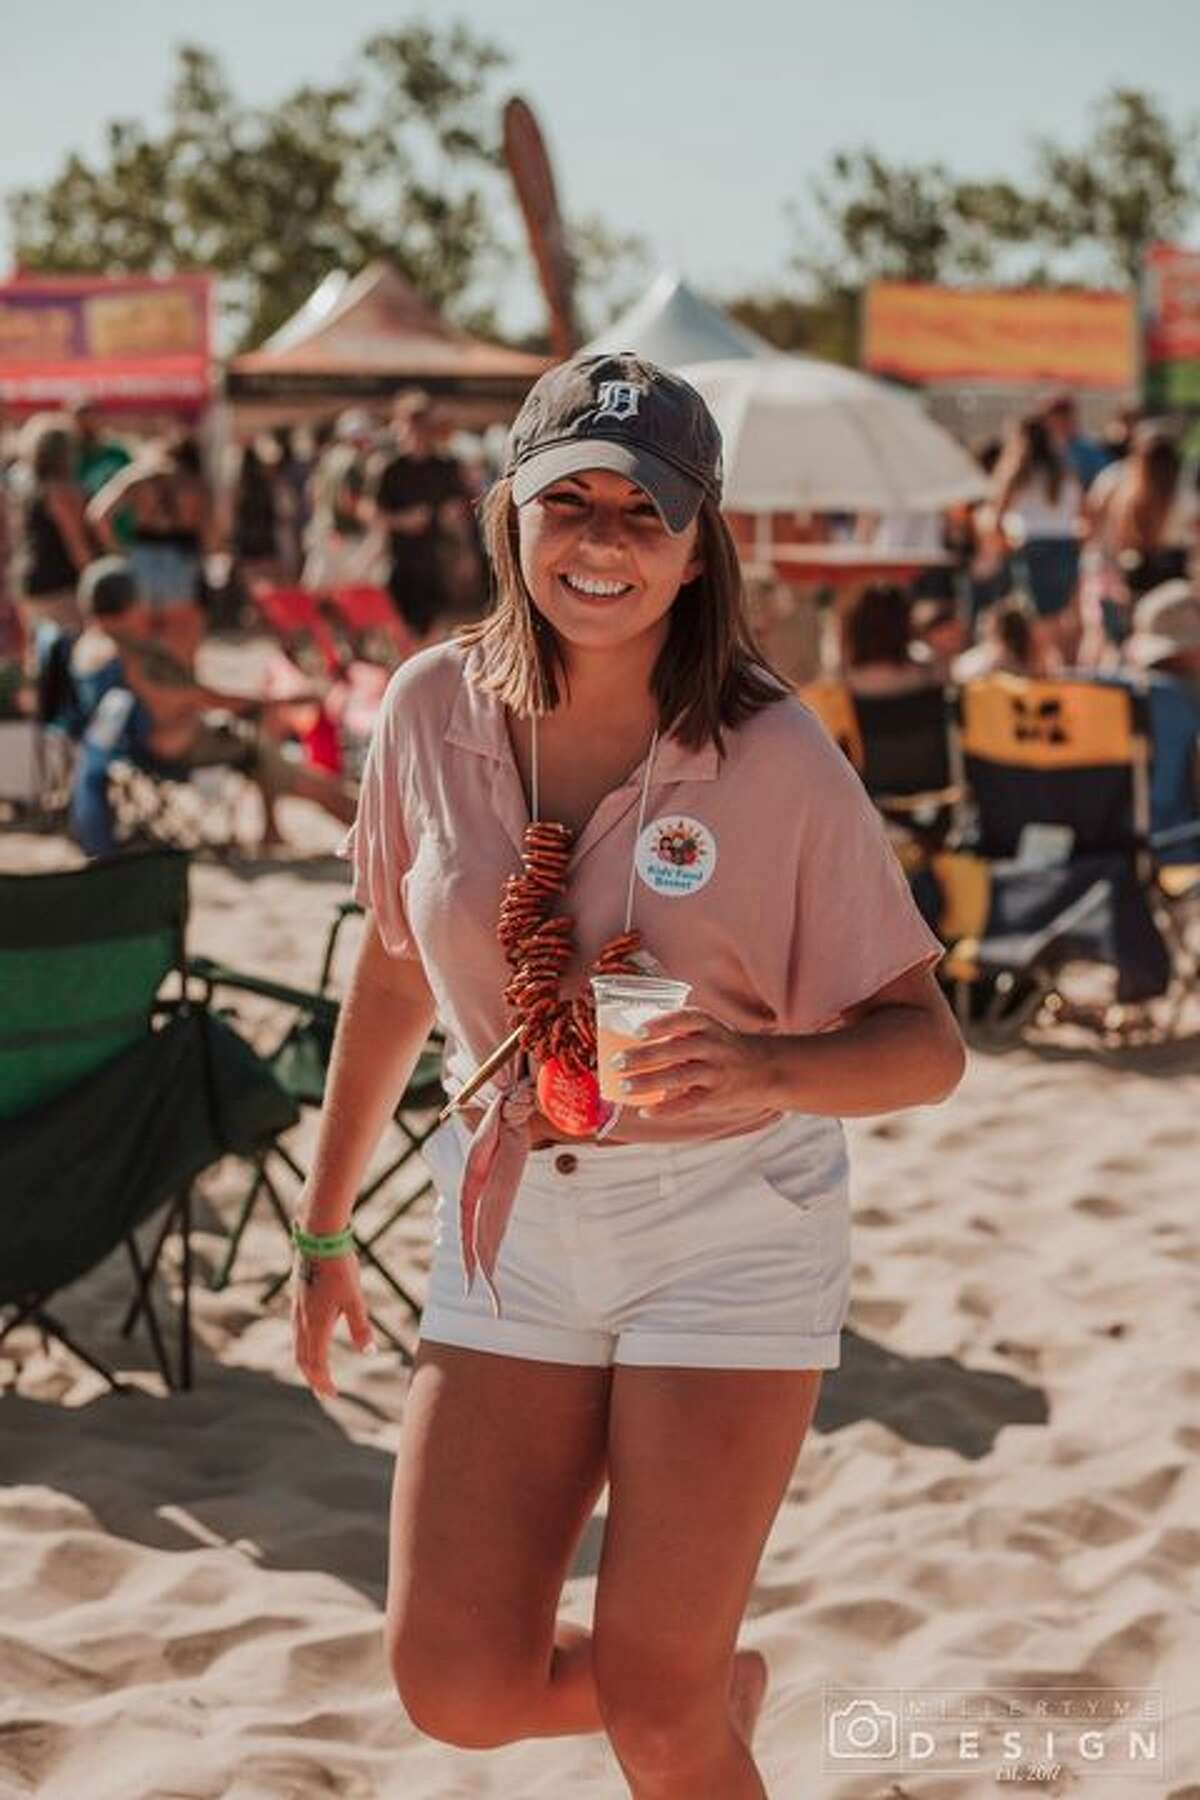 The 2021 Burning Foot Beer Festival will start selling tickets on June 12 for their Aug. 28 event on Muskegon’s expansive Pere Marquette Beach. 